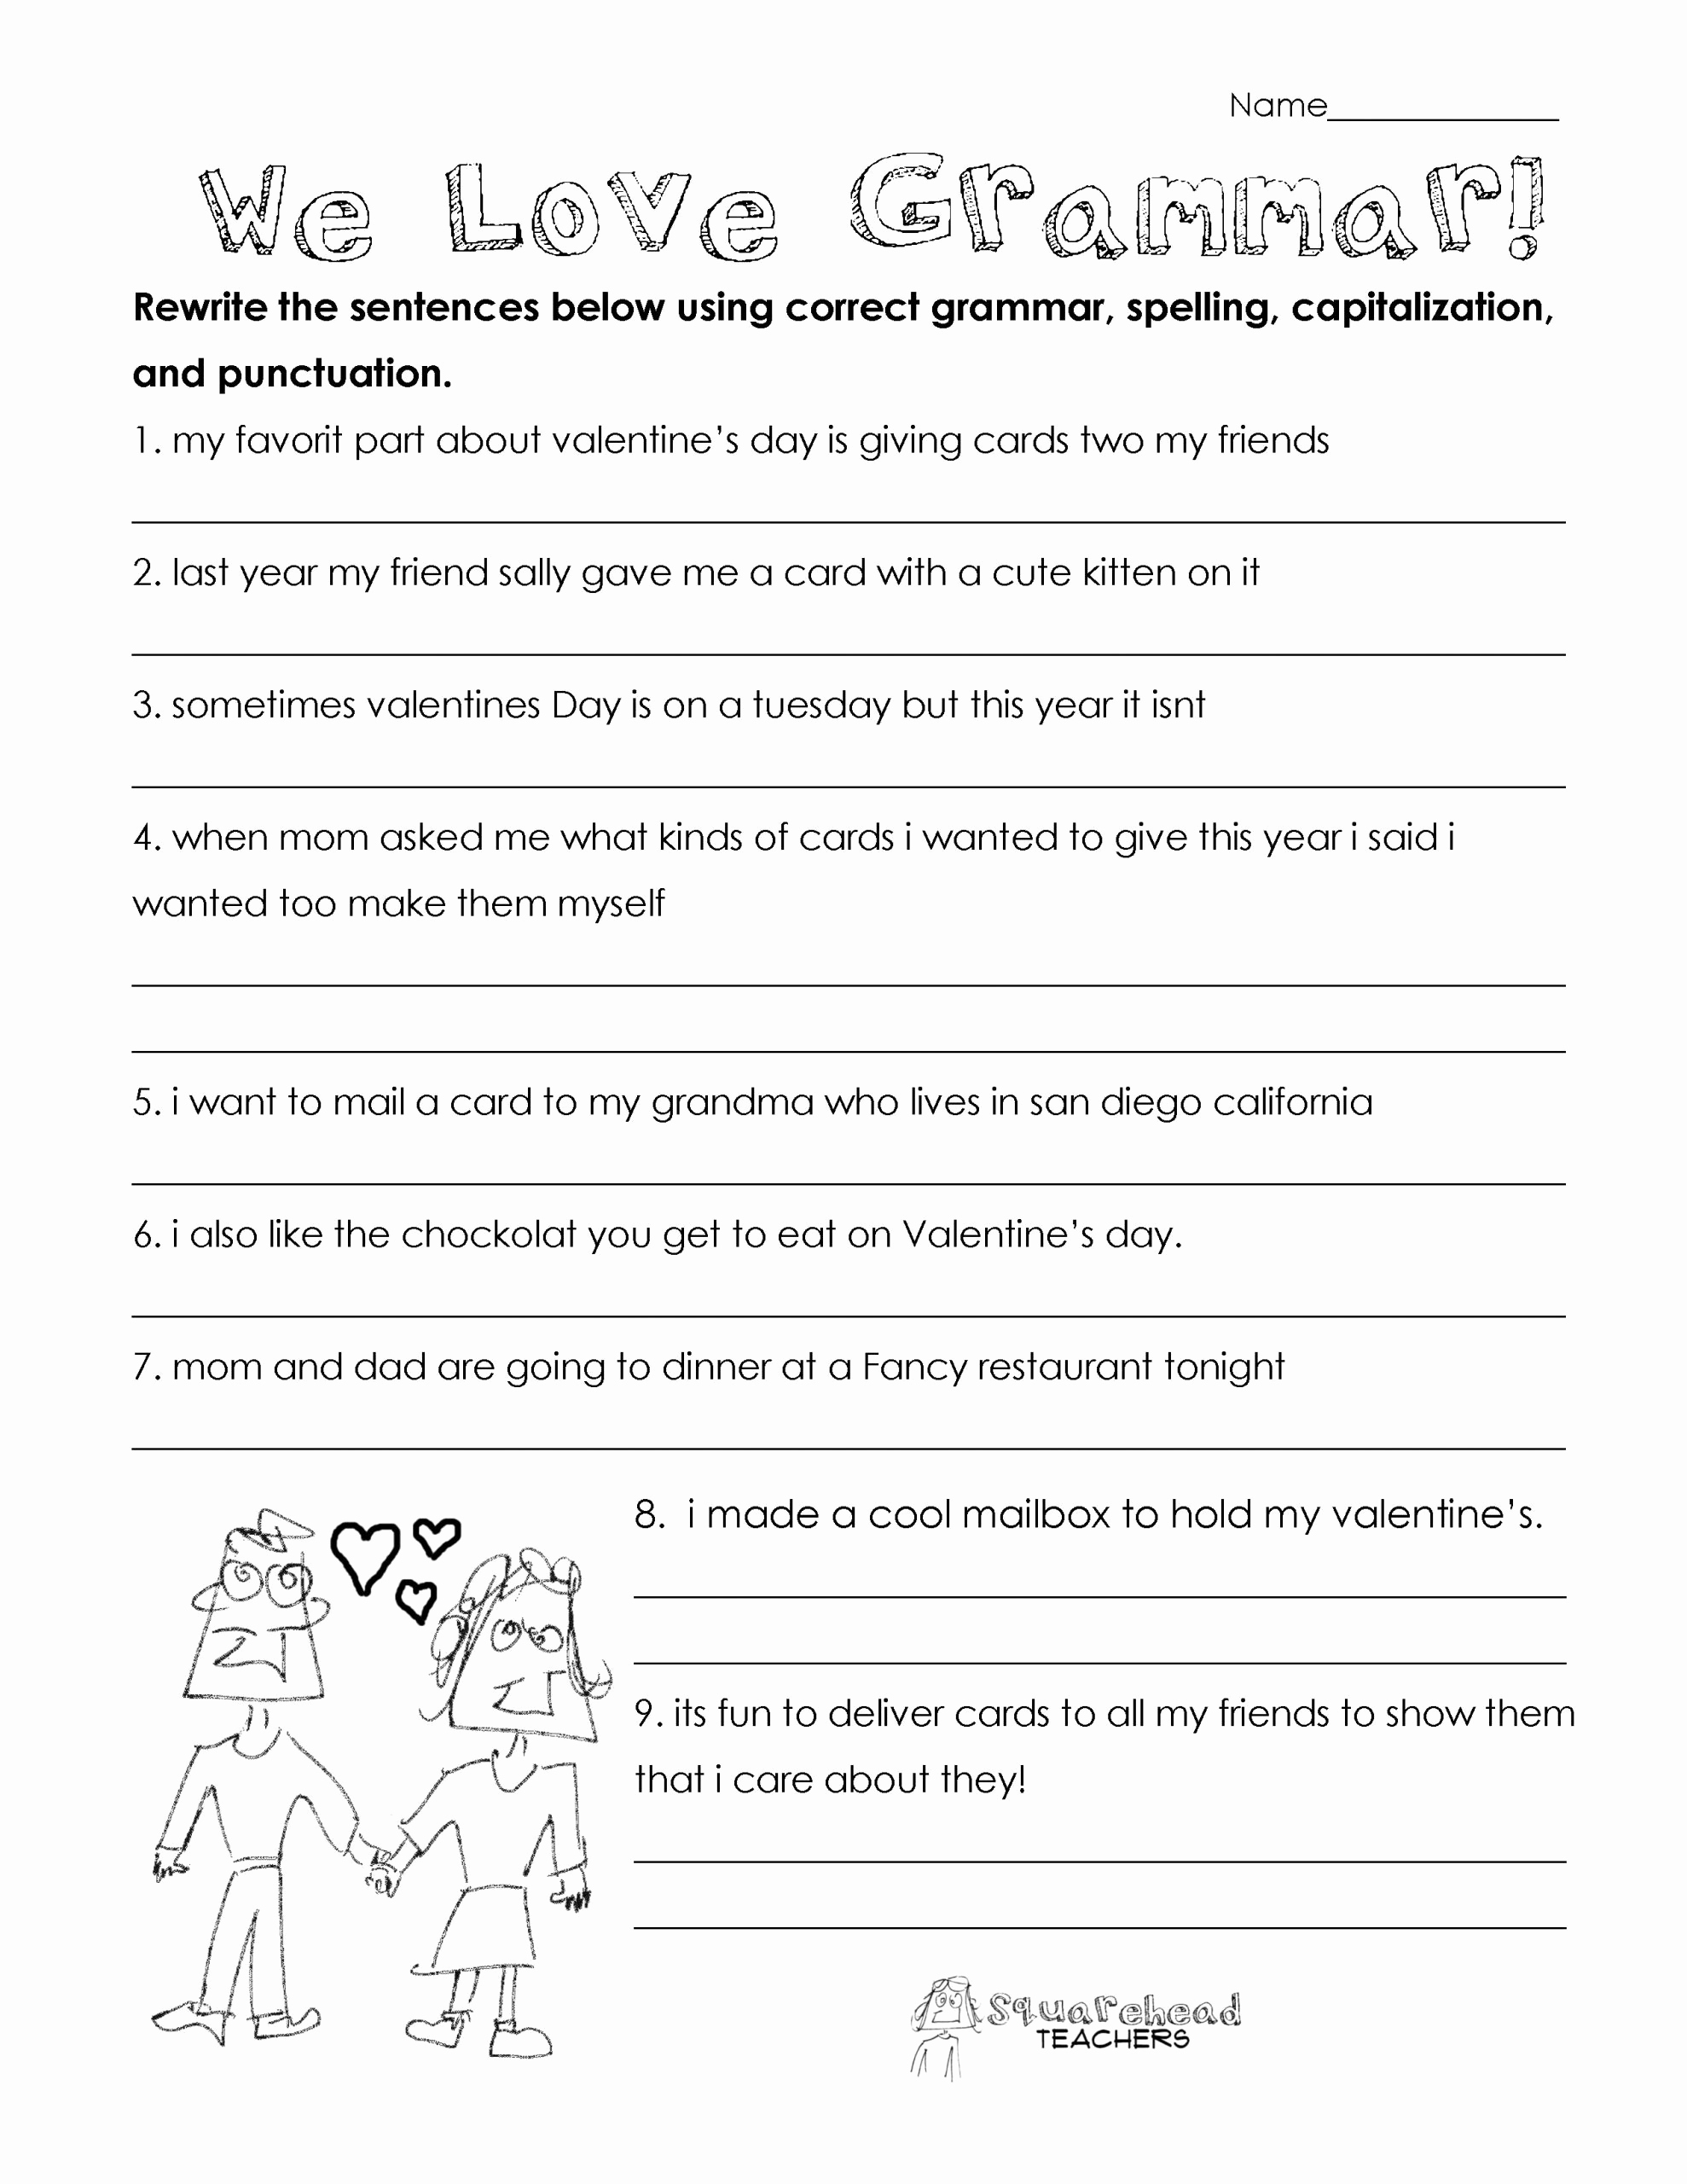 Get 30 Effectively Commas Worksheet 4th Grade Simple Template Design